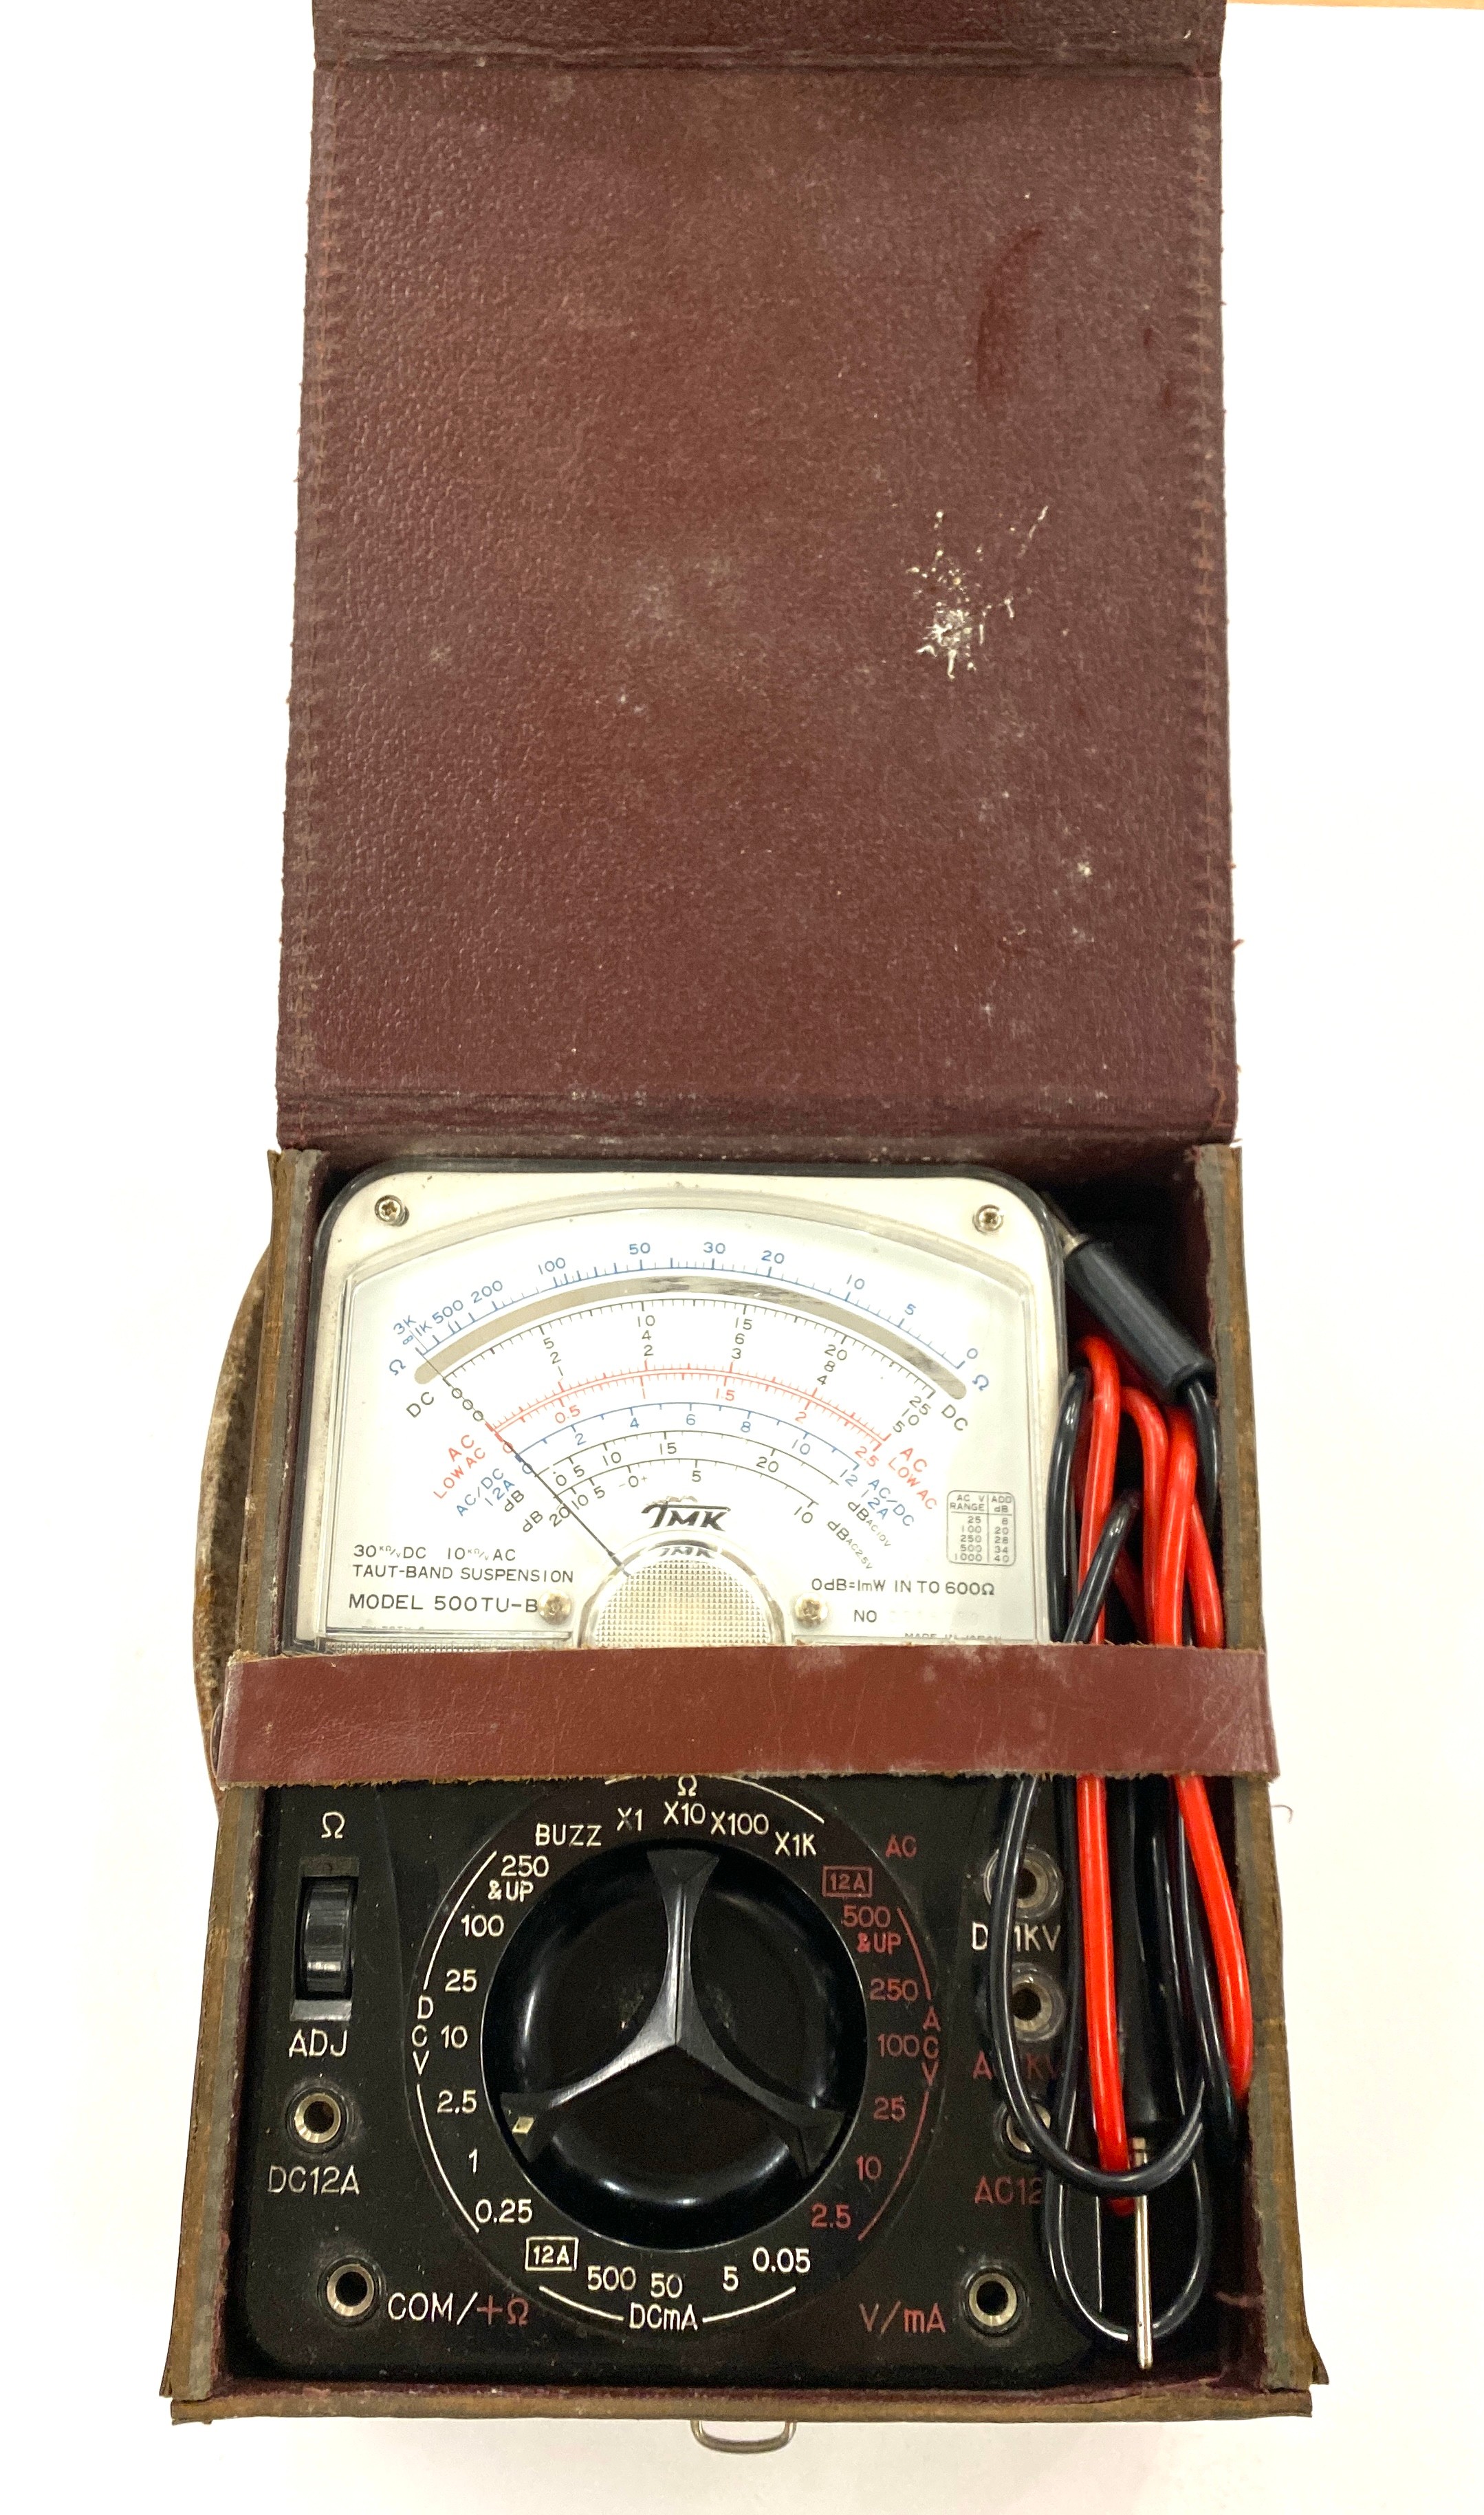 Tmk 500 TU vintage analogue Multimeter tester with test leads with box